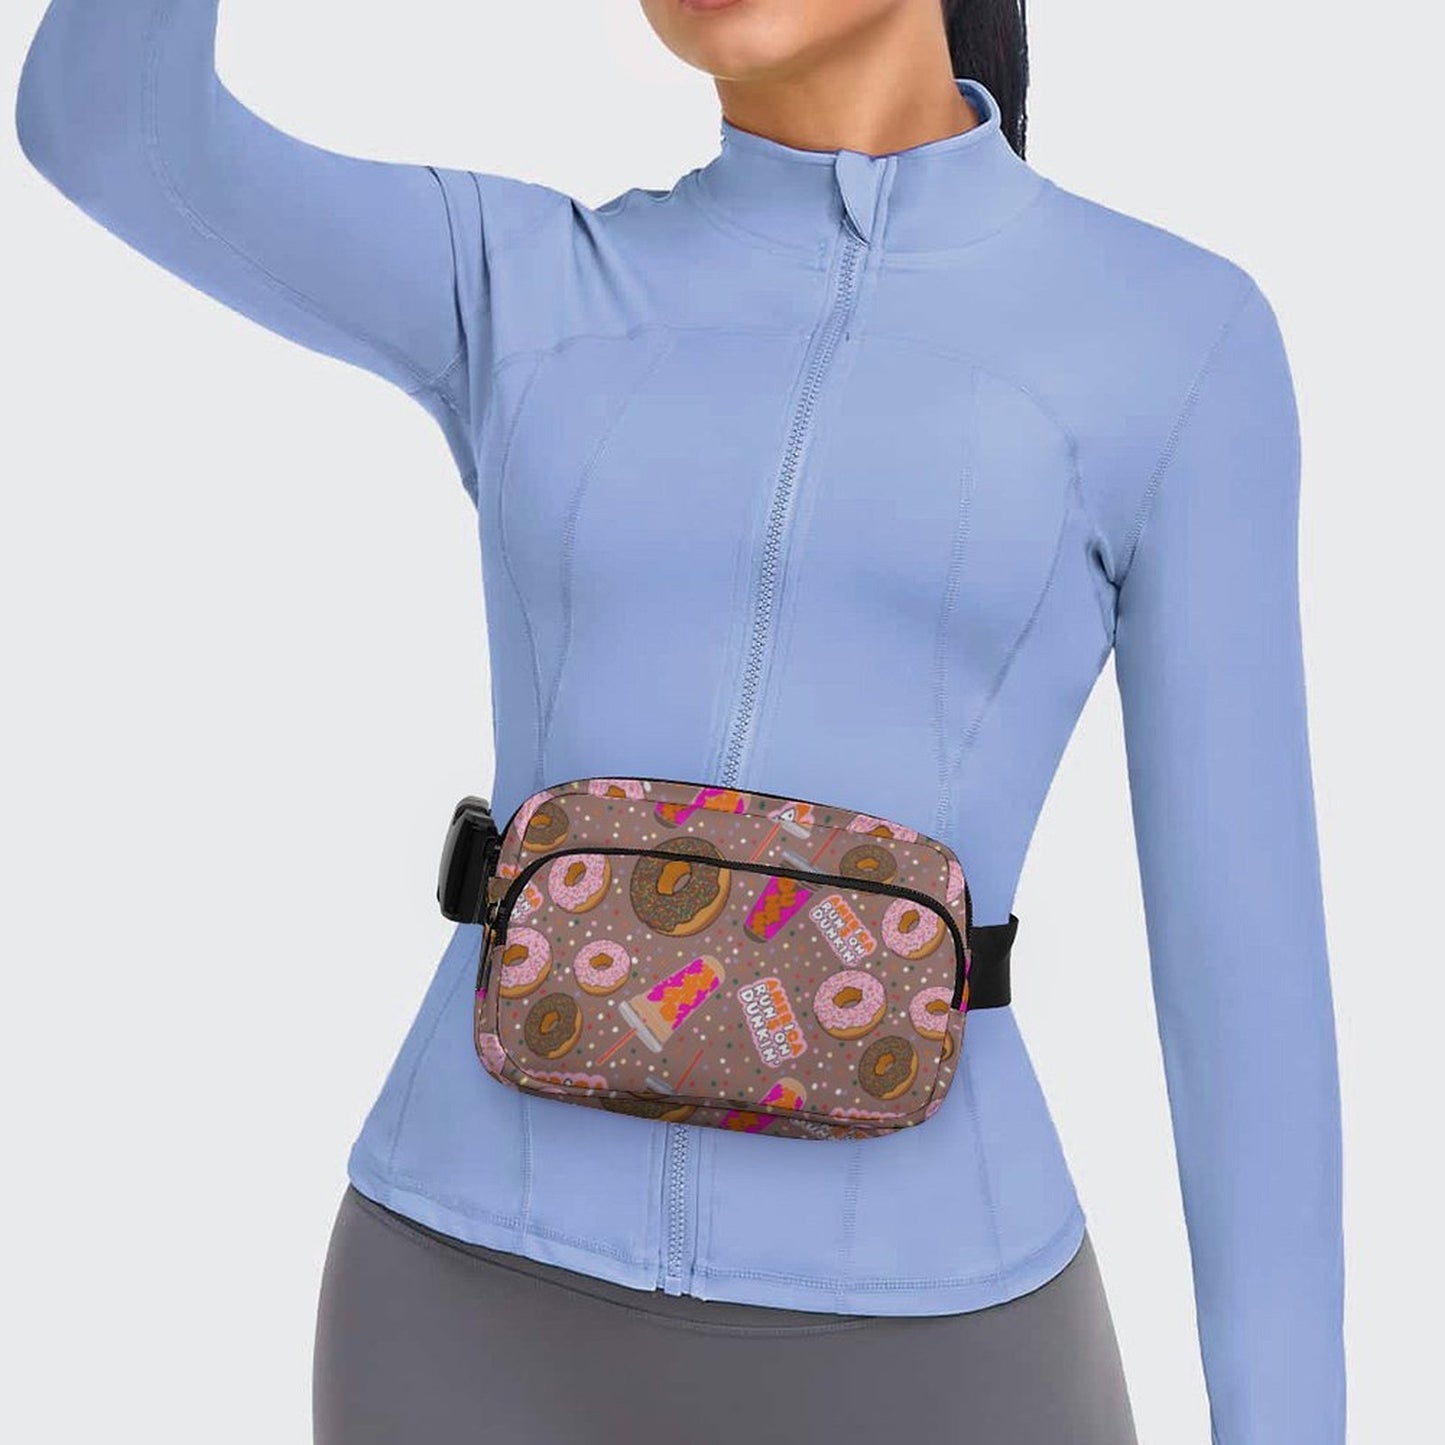 Dunkie Junkie Fanny Pack- PREORDER - Closing 3/2  - ETA late March